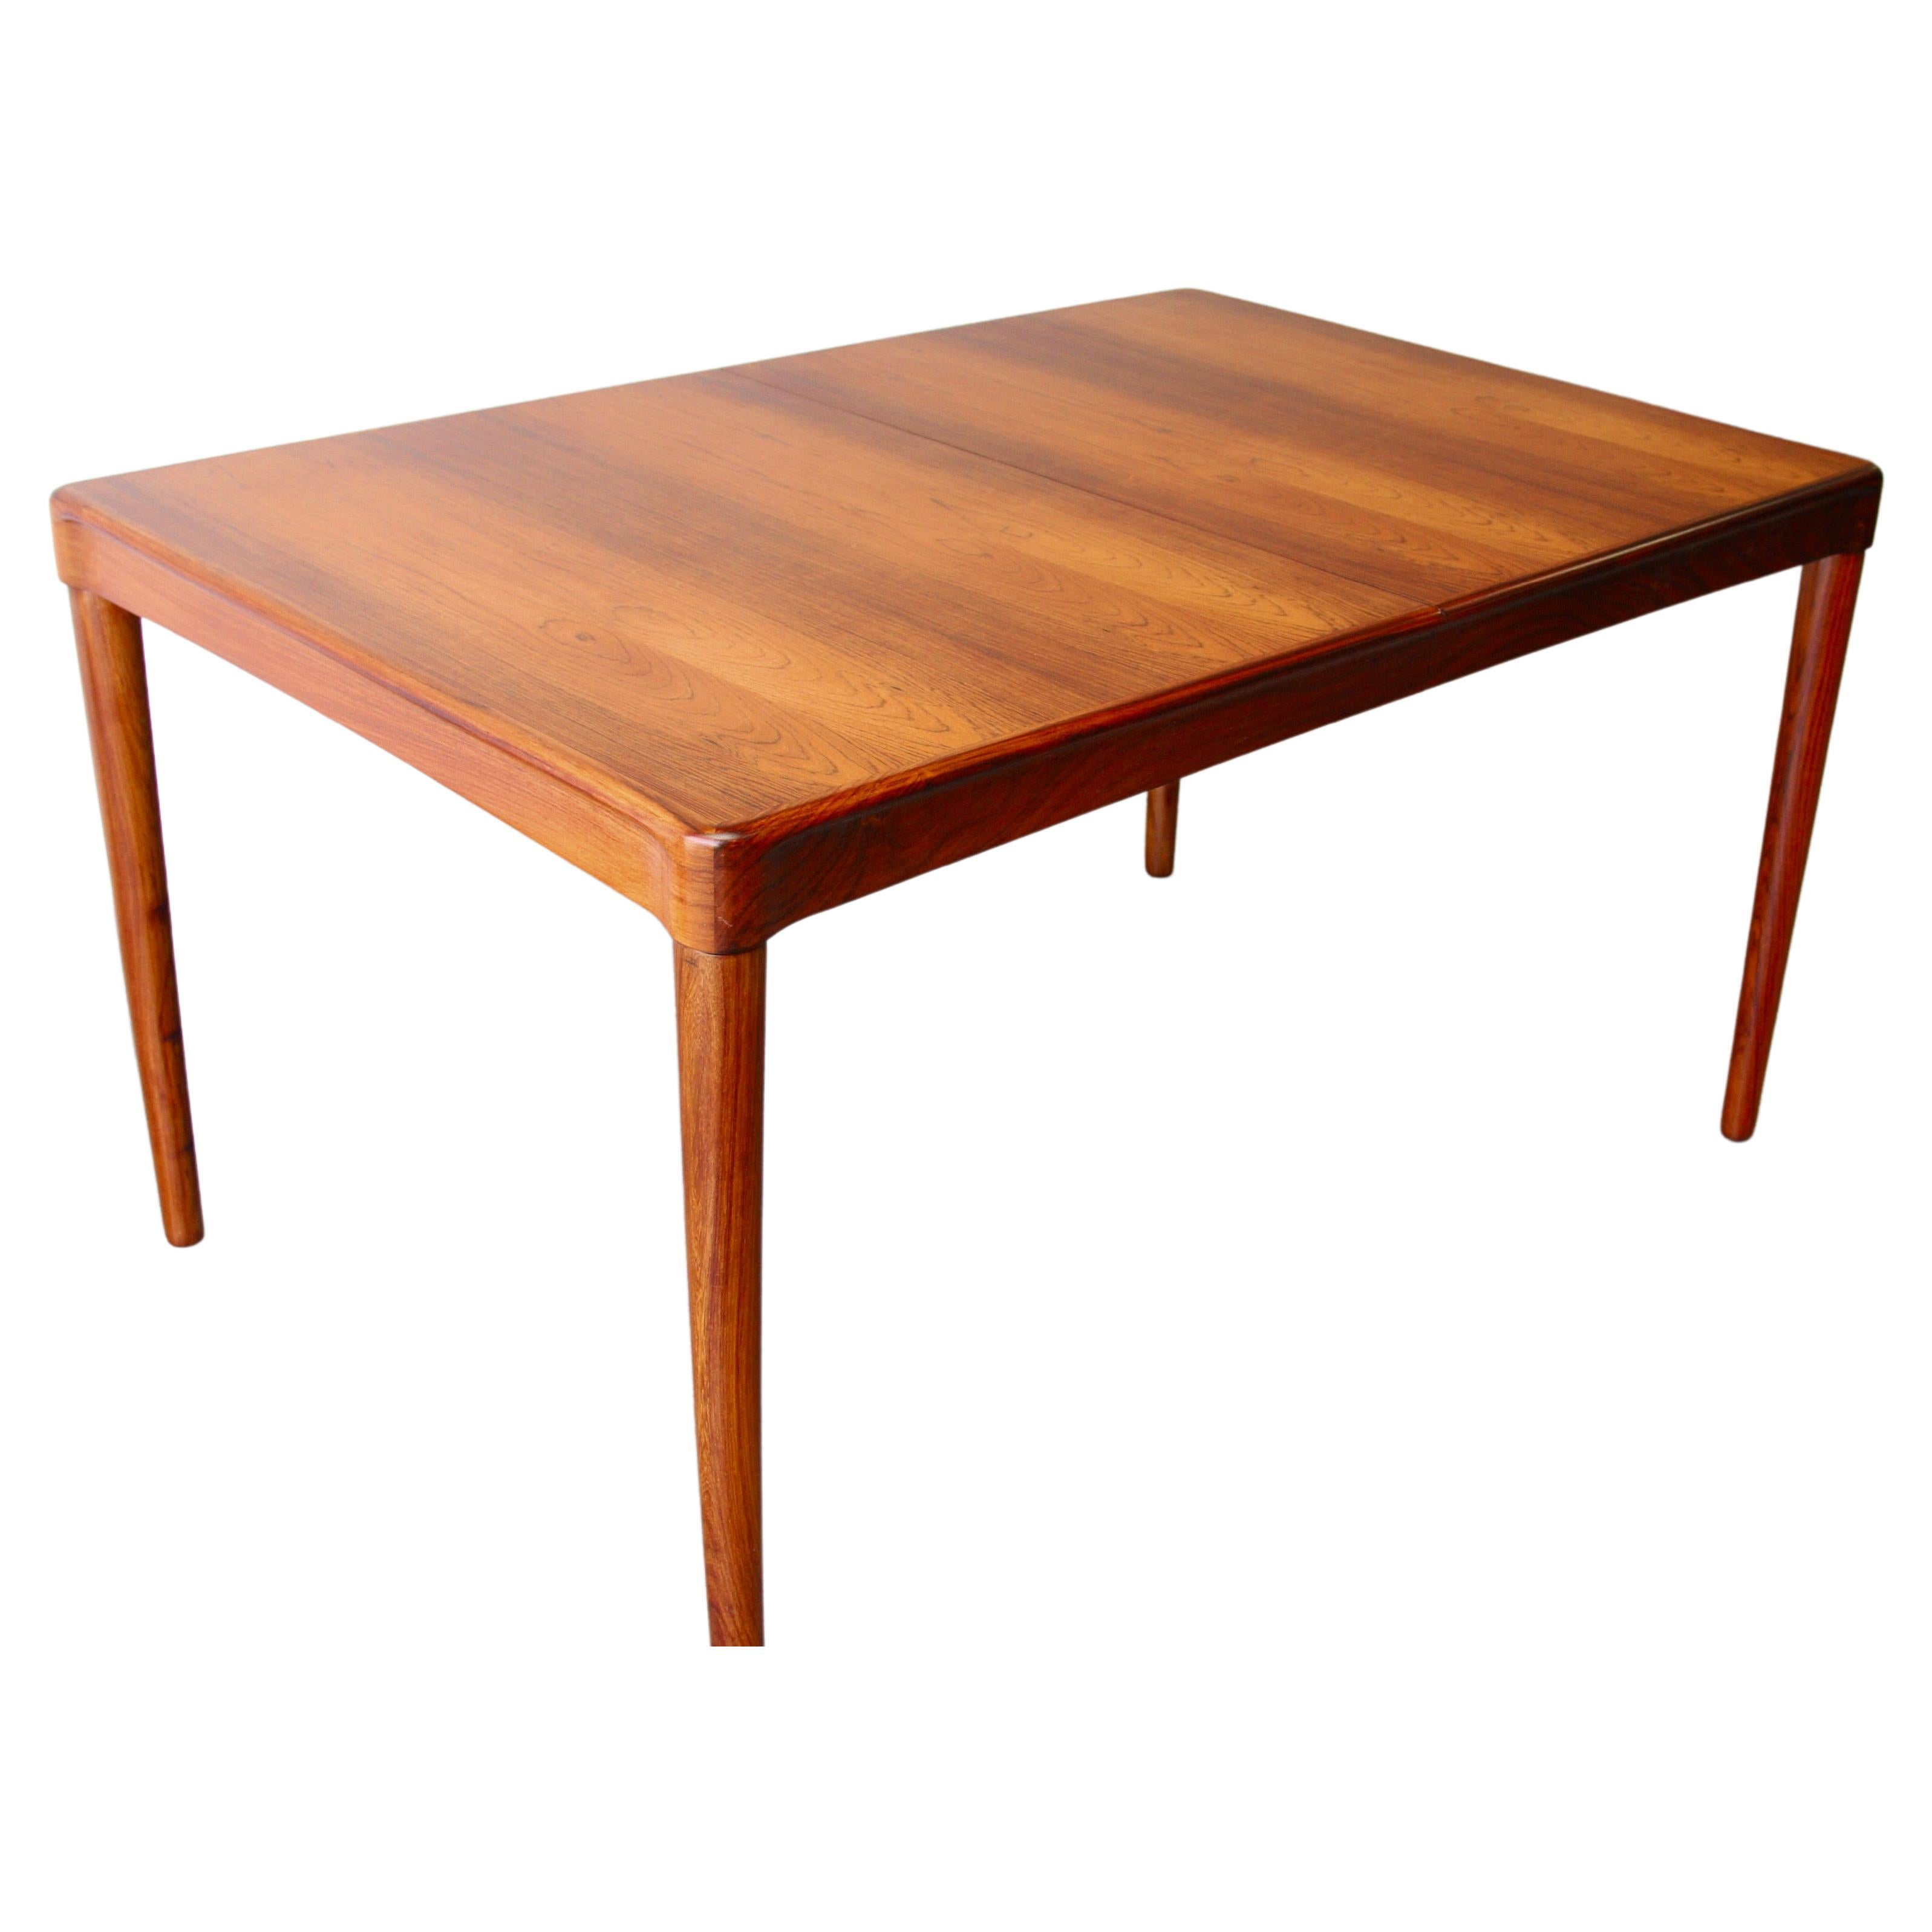 Danish Modern Rosewood Dining Table by H.W. Klein for Bramin Møbler